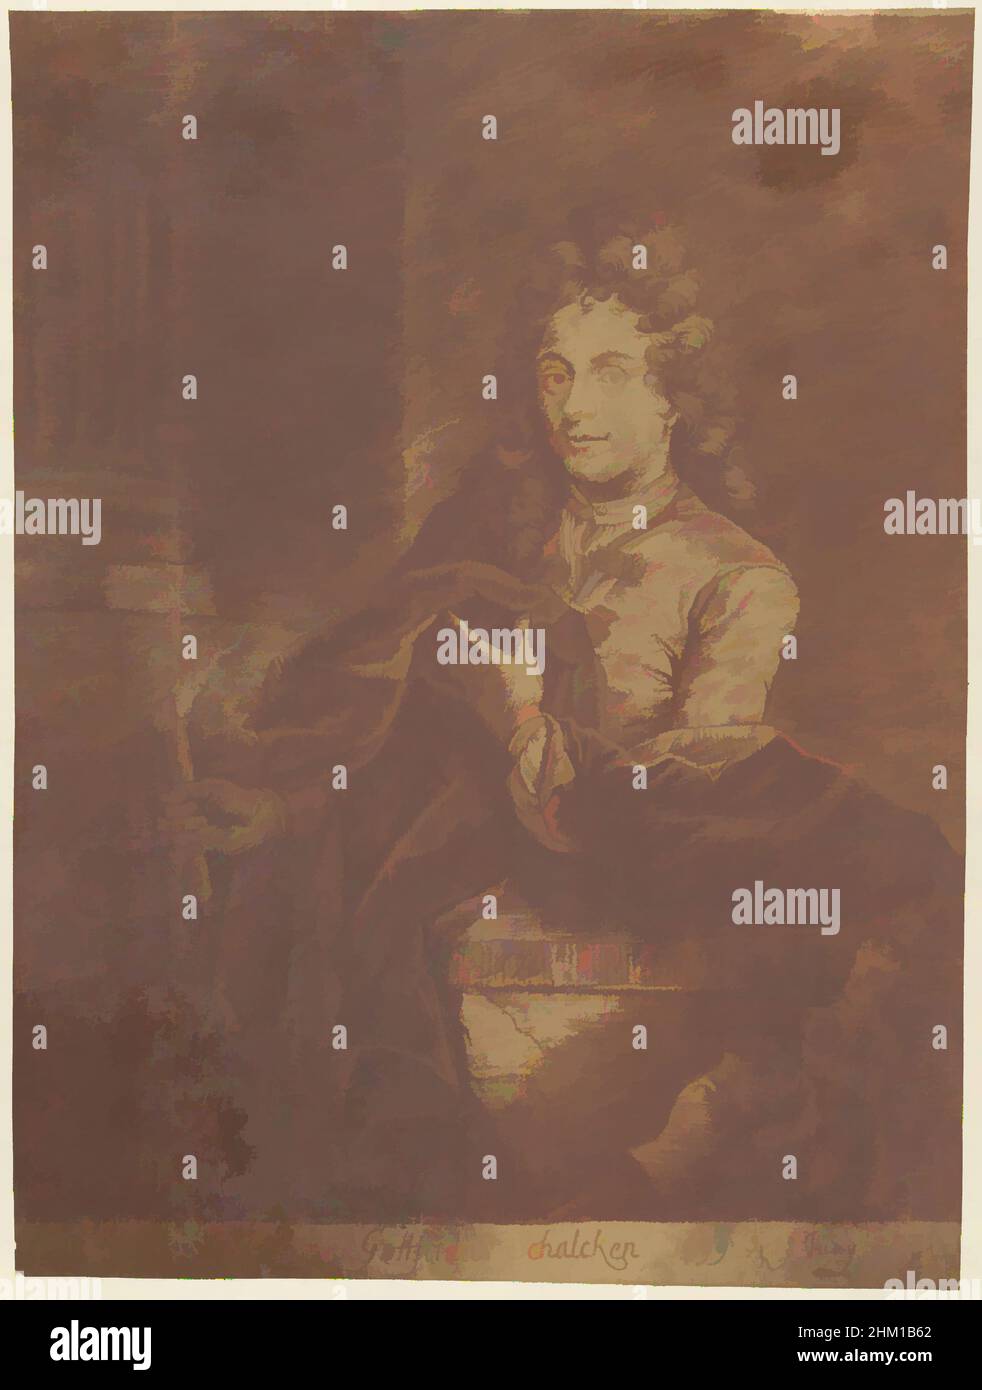 Art inspired by Portrait of Godfrey Schalcken, draughtsman: Jacob Houbraken, 1708 - 1780, paper, chalk, height 320 mm × width 238 mm, Classic works modernized by Artotop with a splash of modernity. Shapes, color and value, eye-catching visual impact on art. Emotions through freedom of artworks in a contemporary way. A timeless message pursuing a wildly creative new direction. Artists turning to the digital medium and creating the Artotop NFT Stock Photo